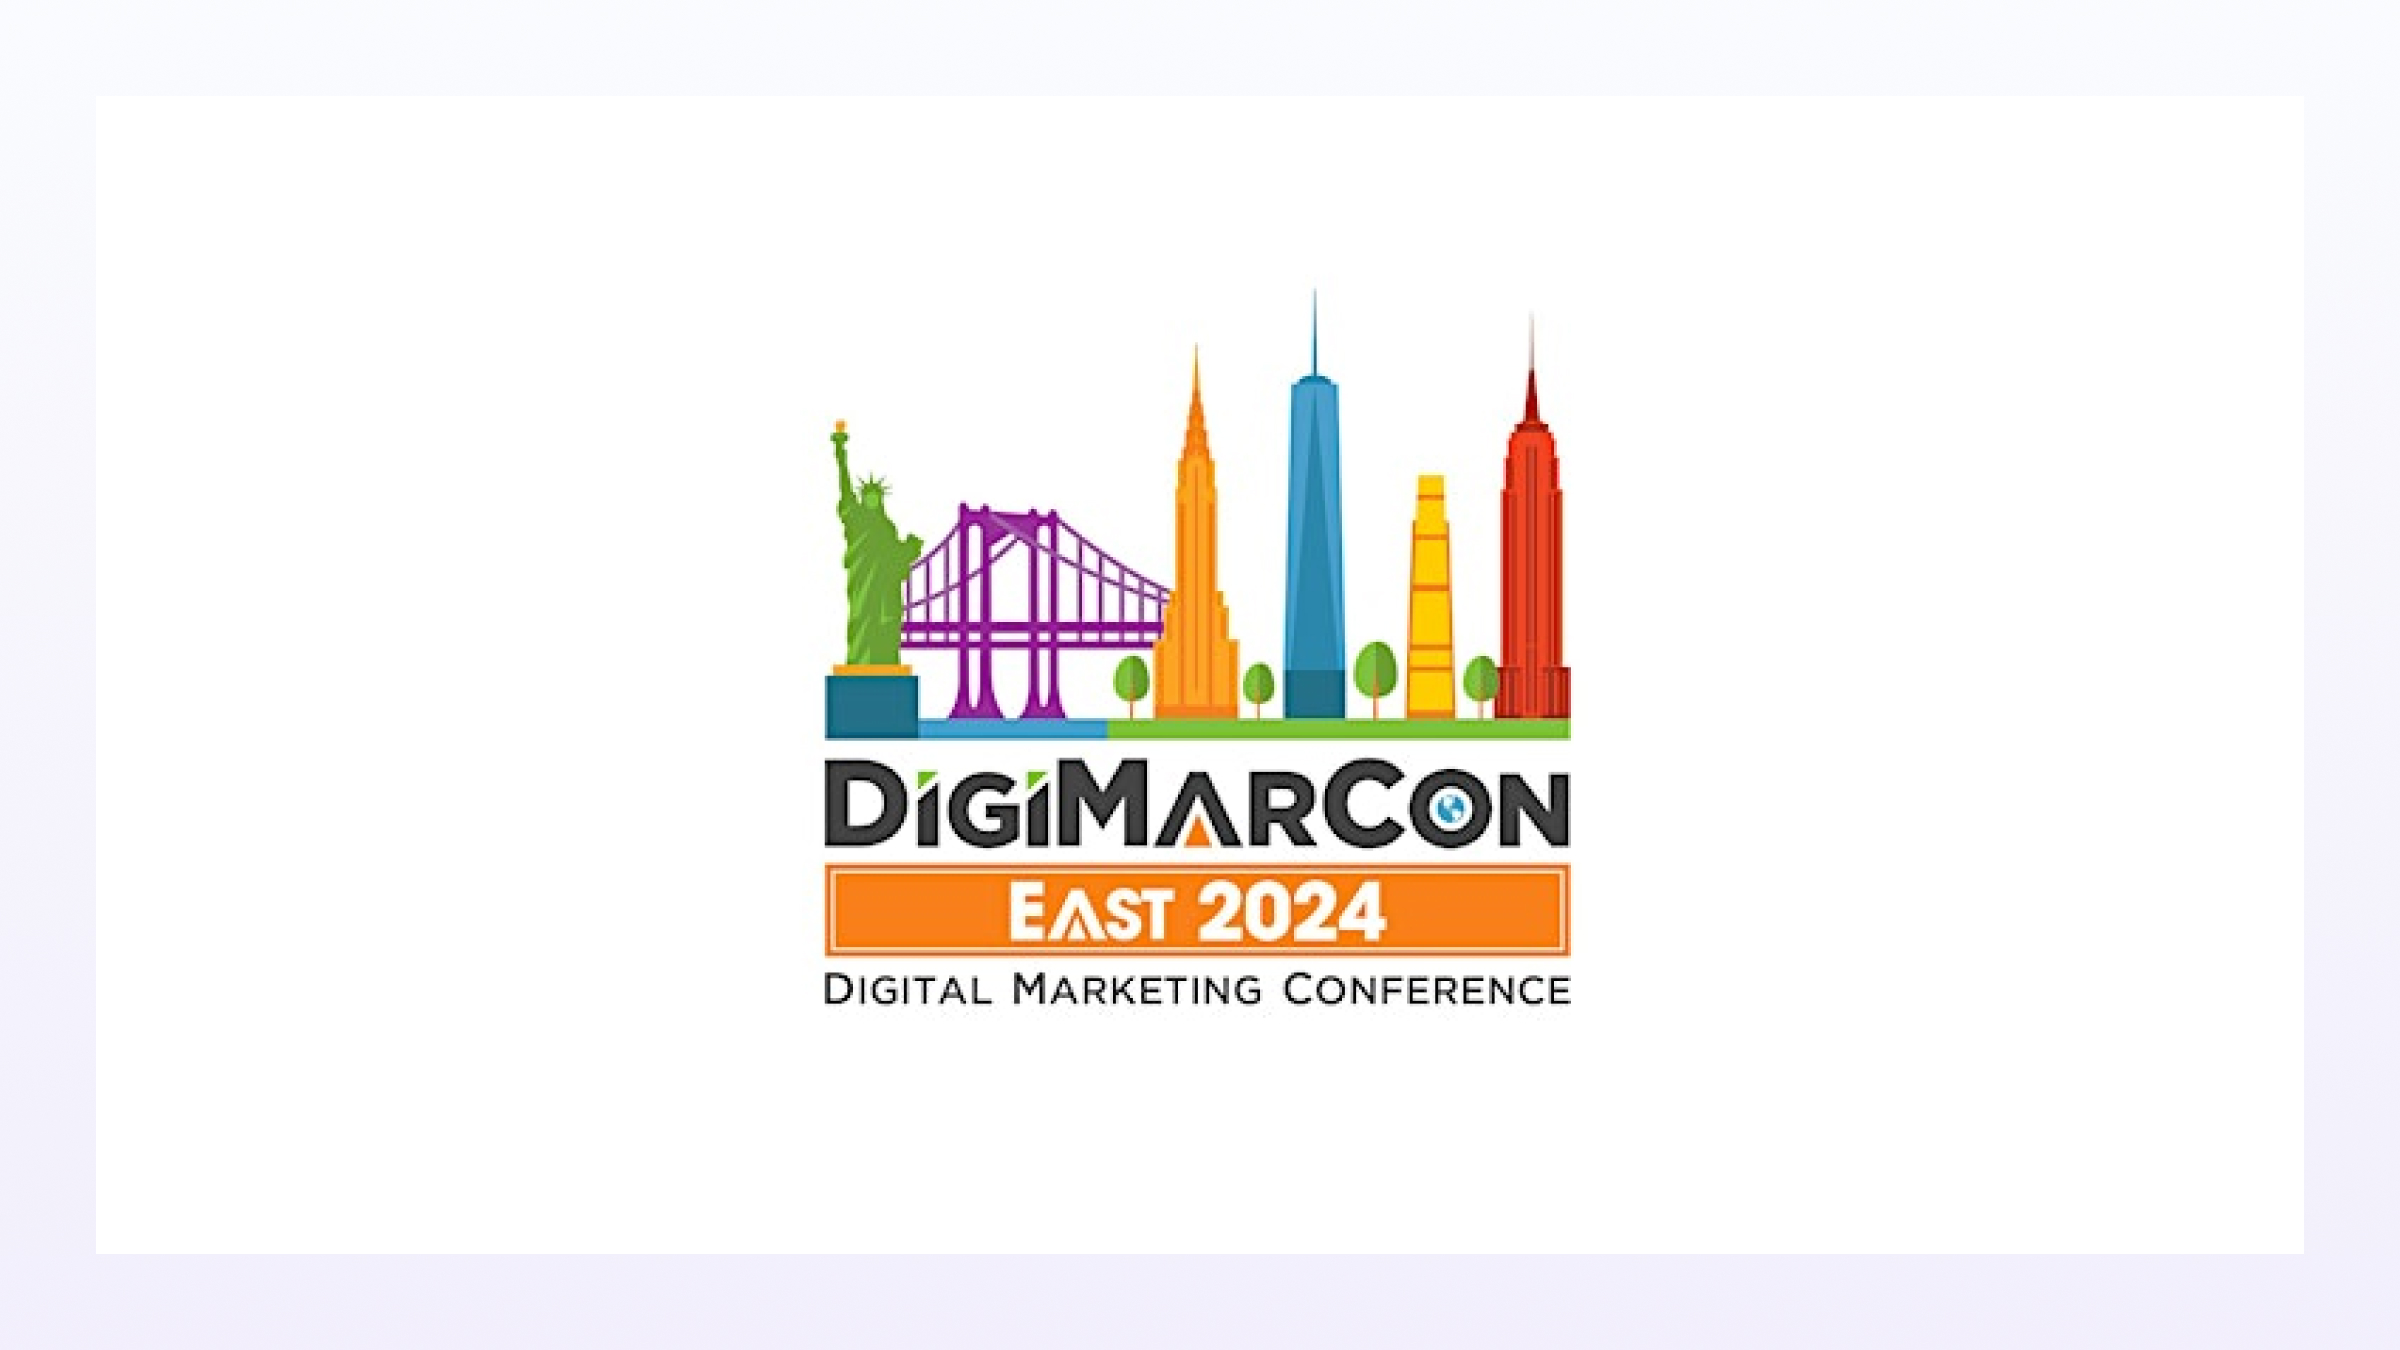 DigiMarCon East NYC
Date: May 16-17, 2024
Smartling session title: Global growth starts with translation: How to unlock global markets